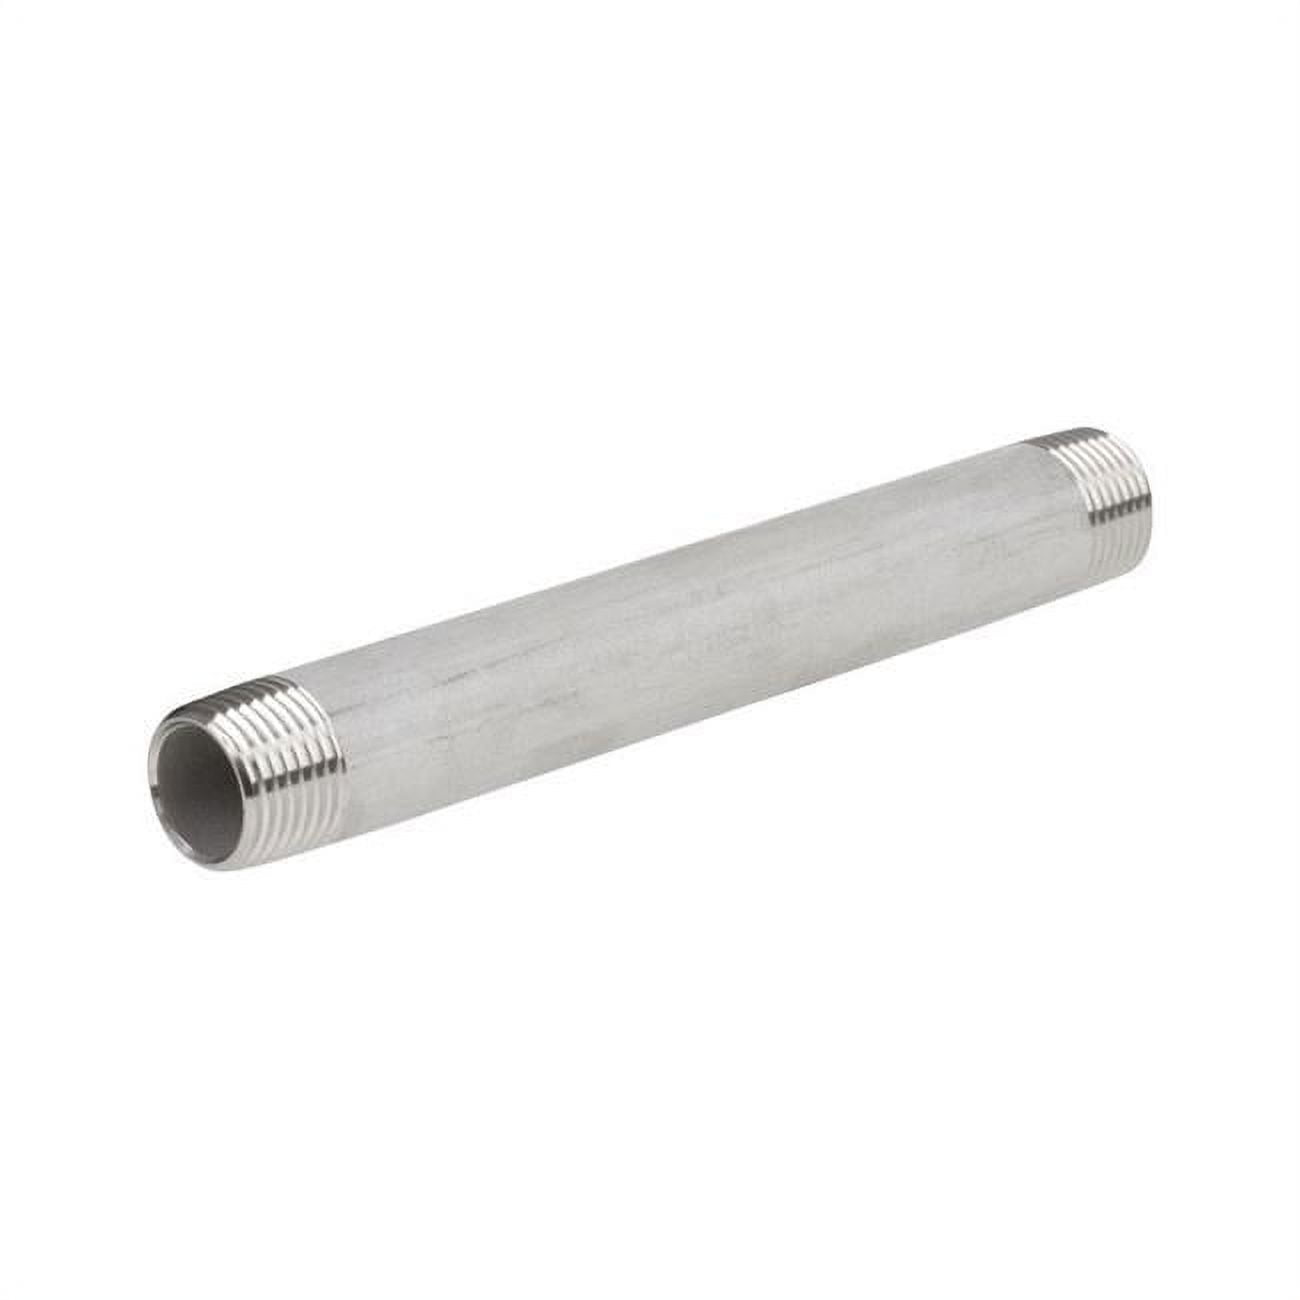 4868576 Stainless Steel Pipe Nipple, 2 Mpt X 2 Dia. X 6 In. Mpt